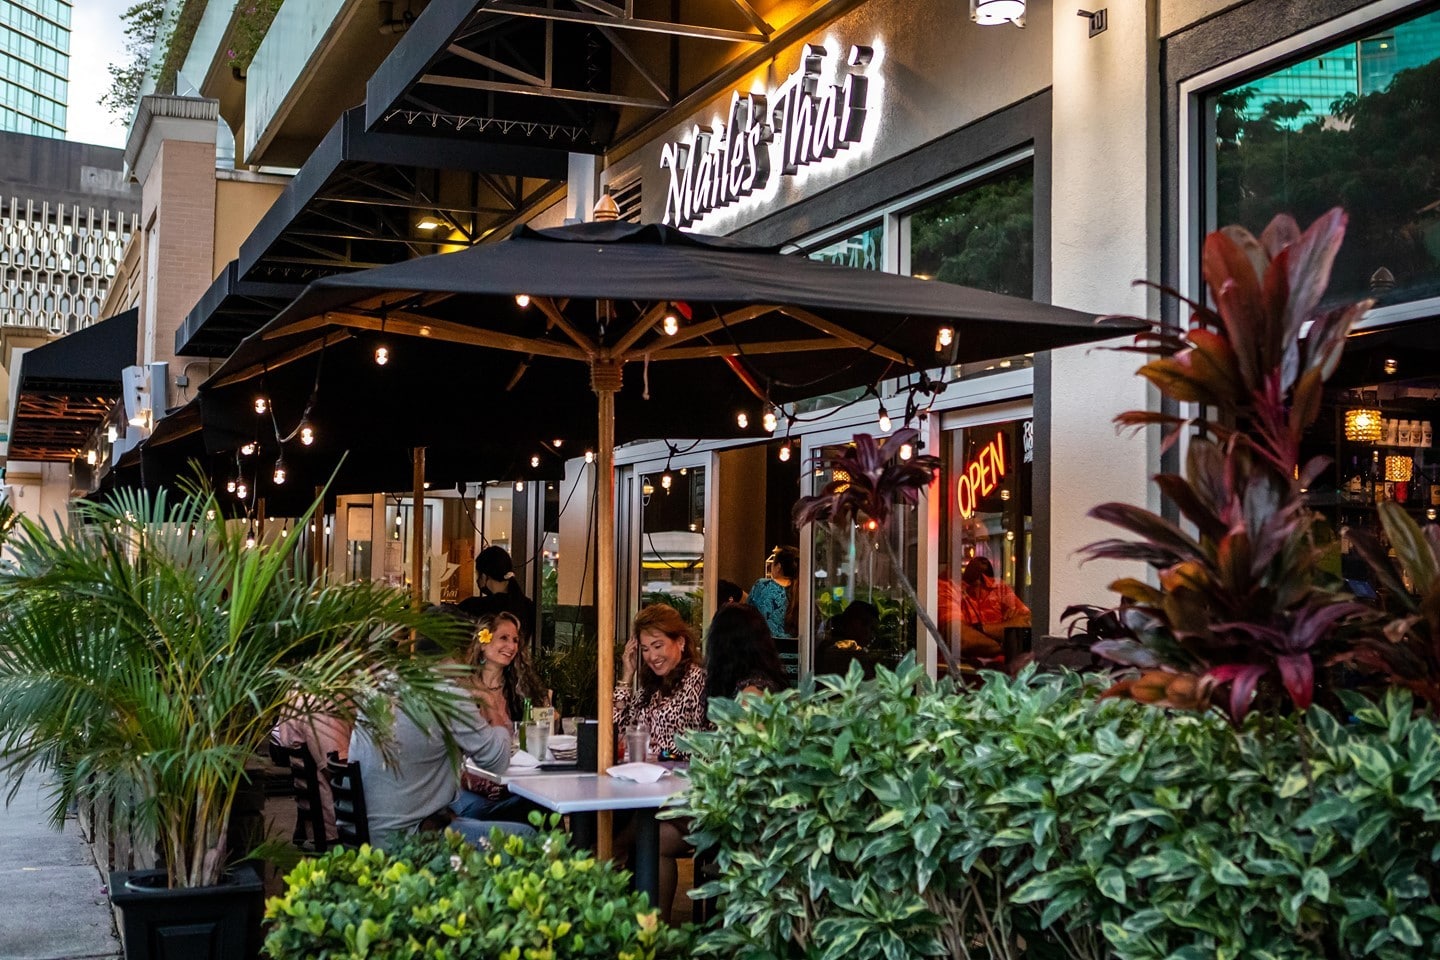 The perfect spot for outdoor dining!  Check out Maile's Thai Bistro in Ward Centre and discover authentic Thai food with local twists.